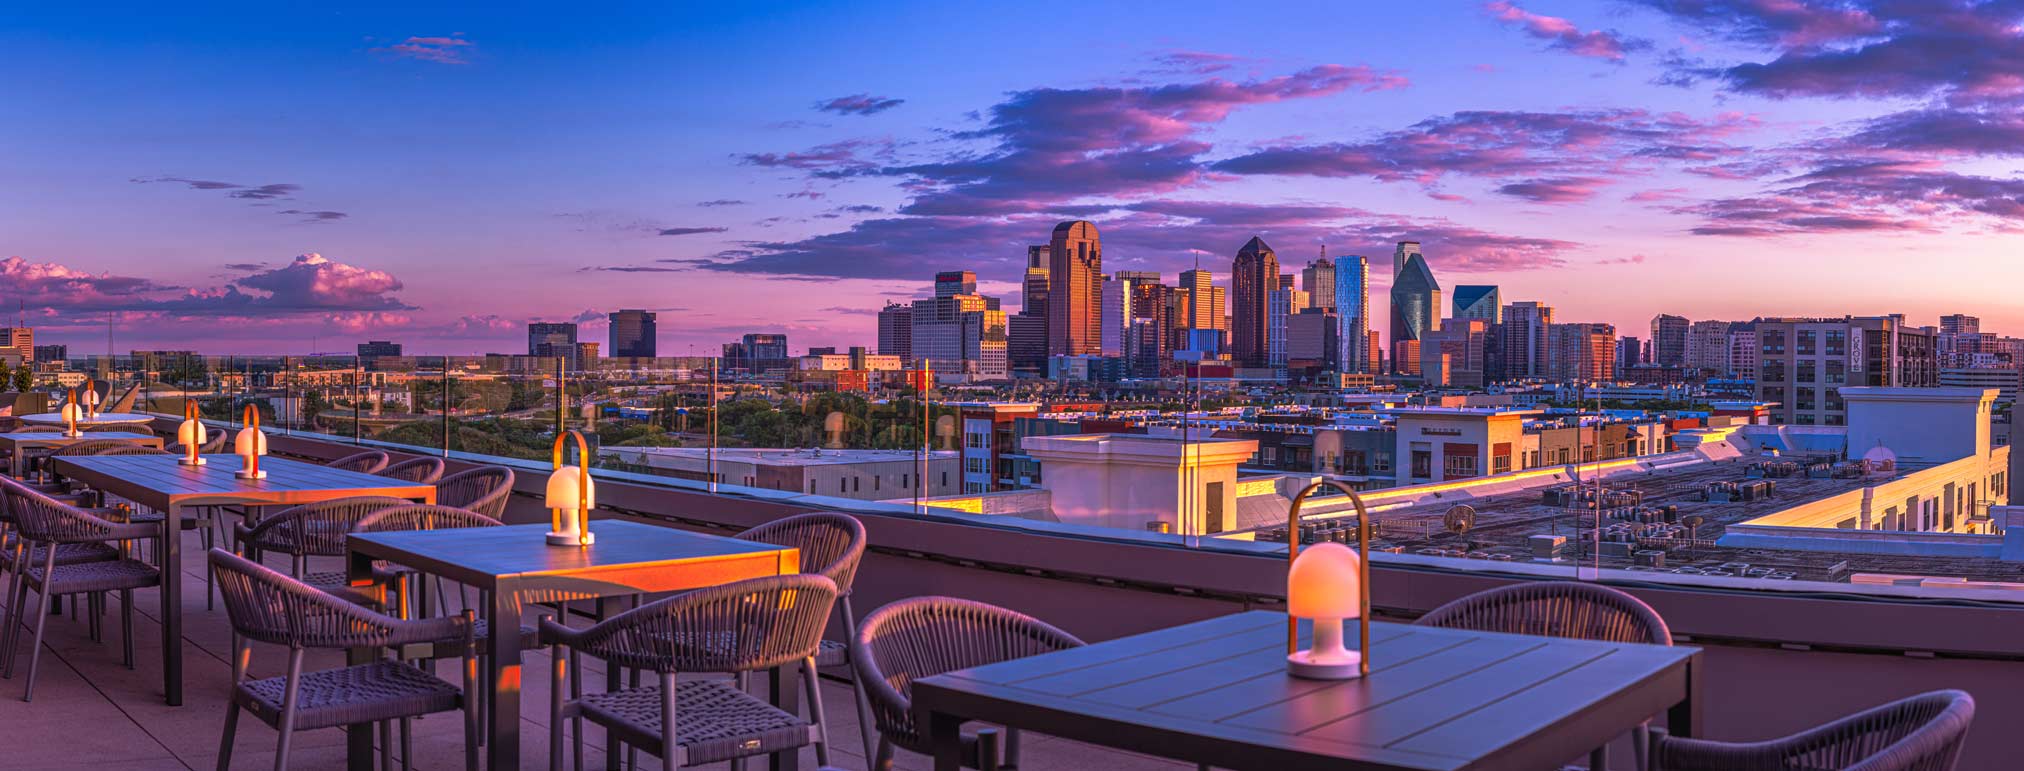 Uptown Dallas Rooftop Lounge